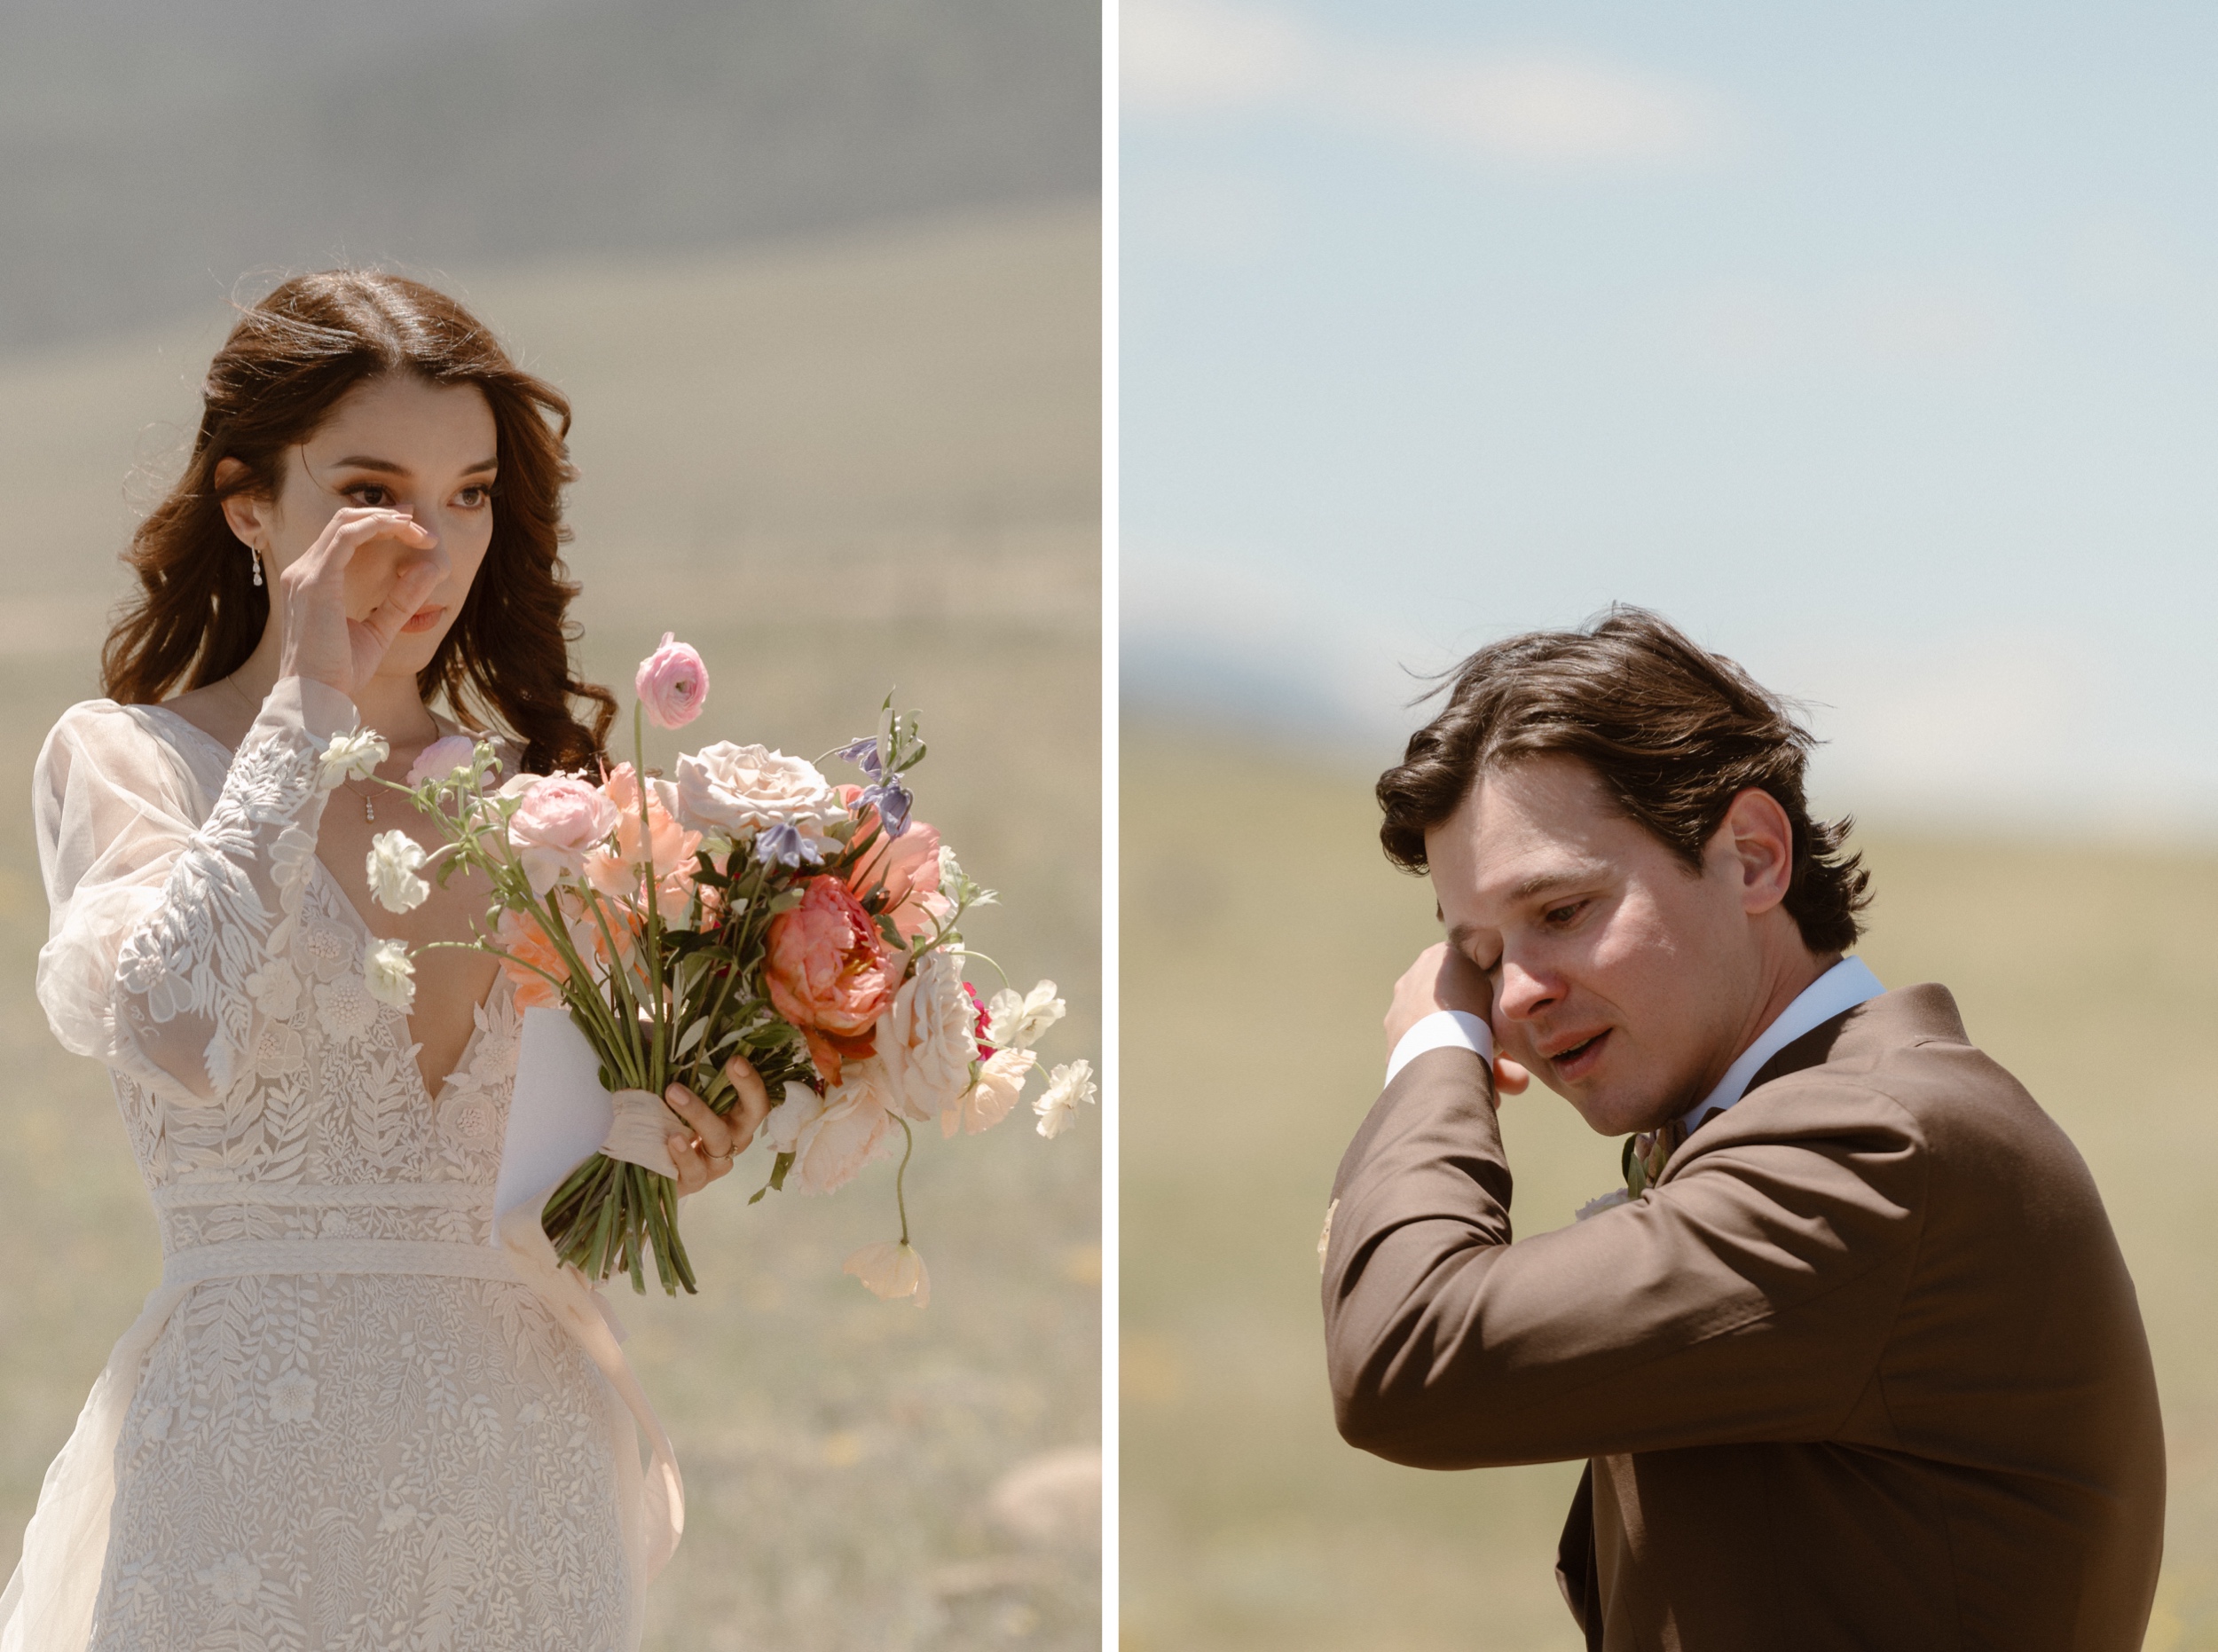 Two photos side-by-side of a bride on the left and a groom on the right as they both wipe away their tears. Photo by Colorado wedding photographer Ashley Joyce.